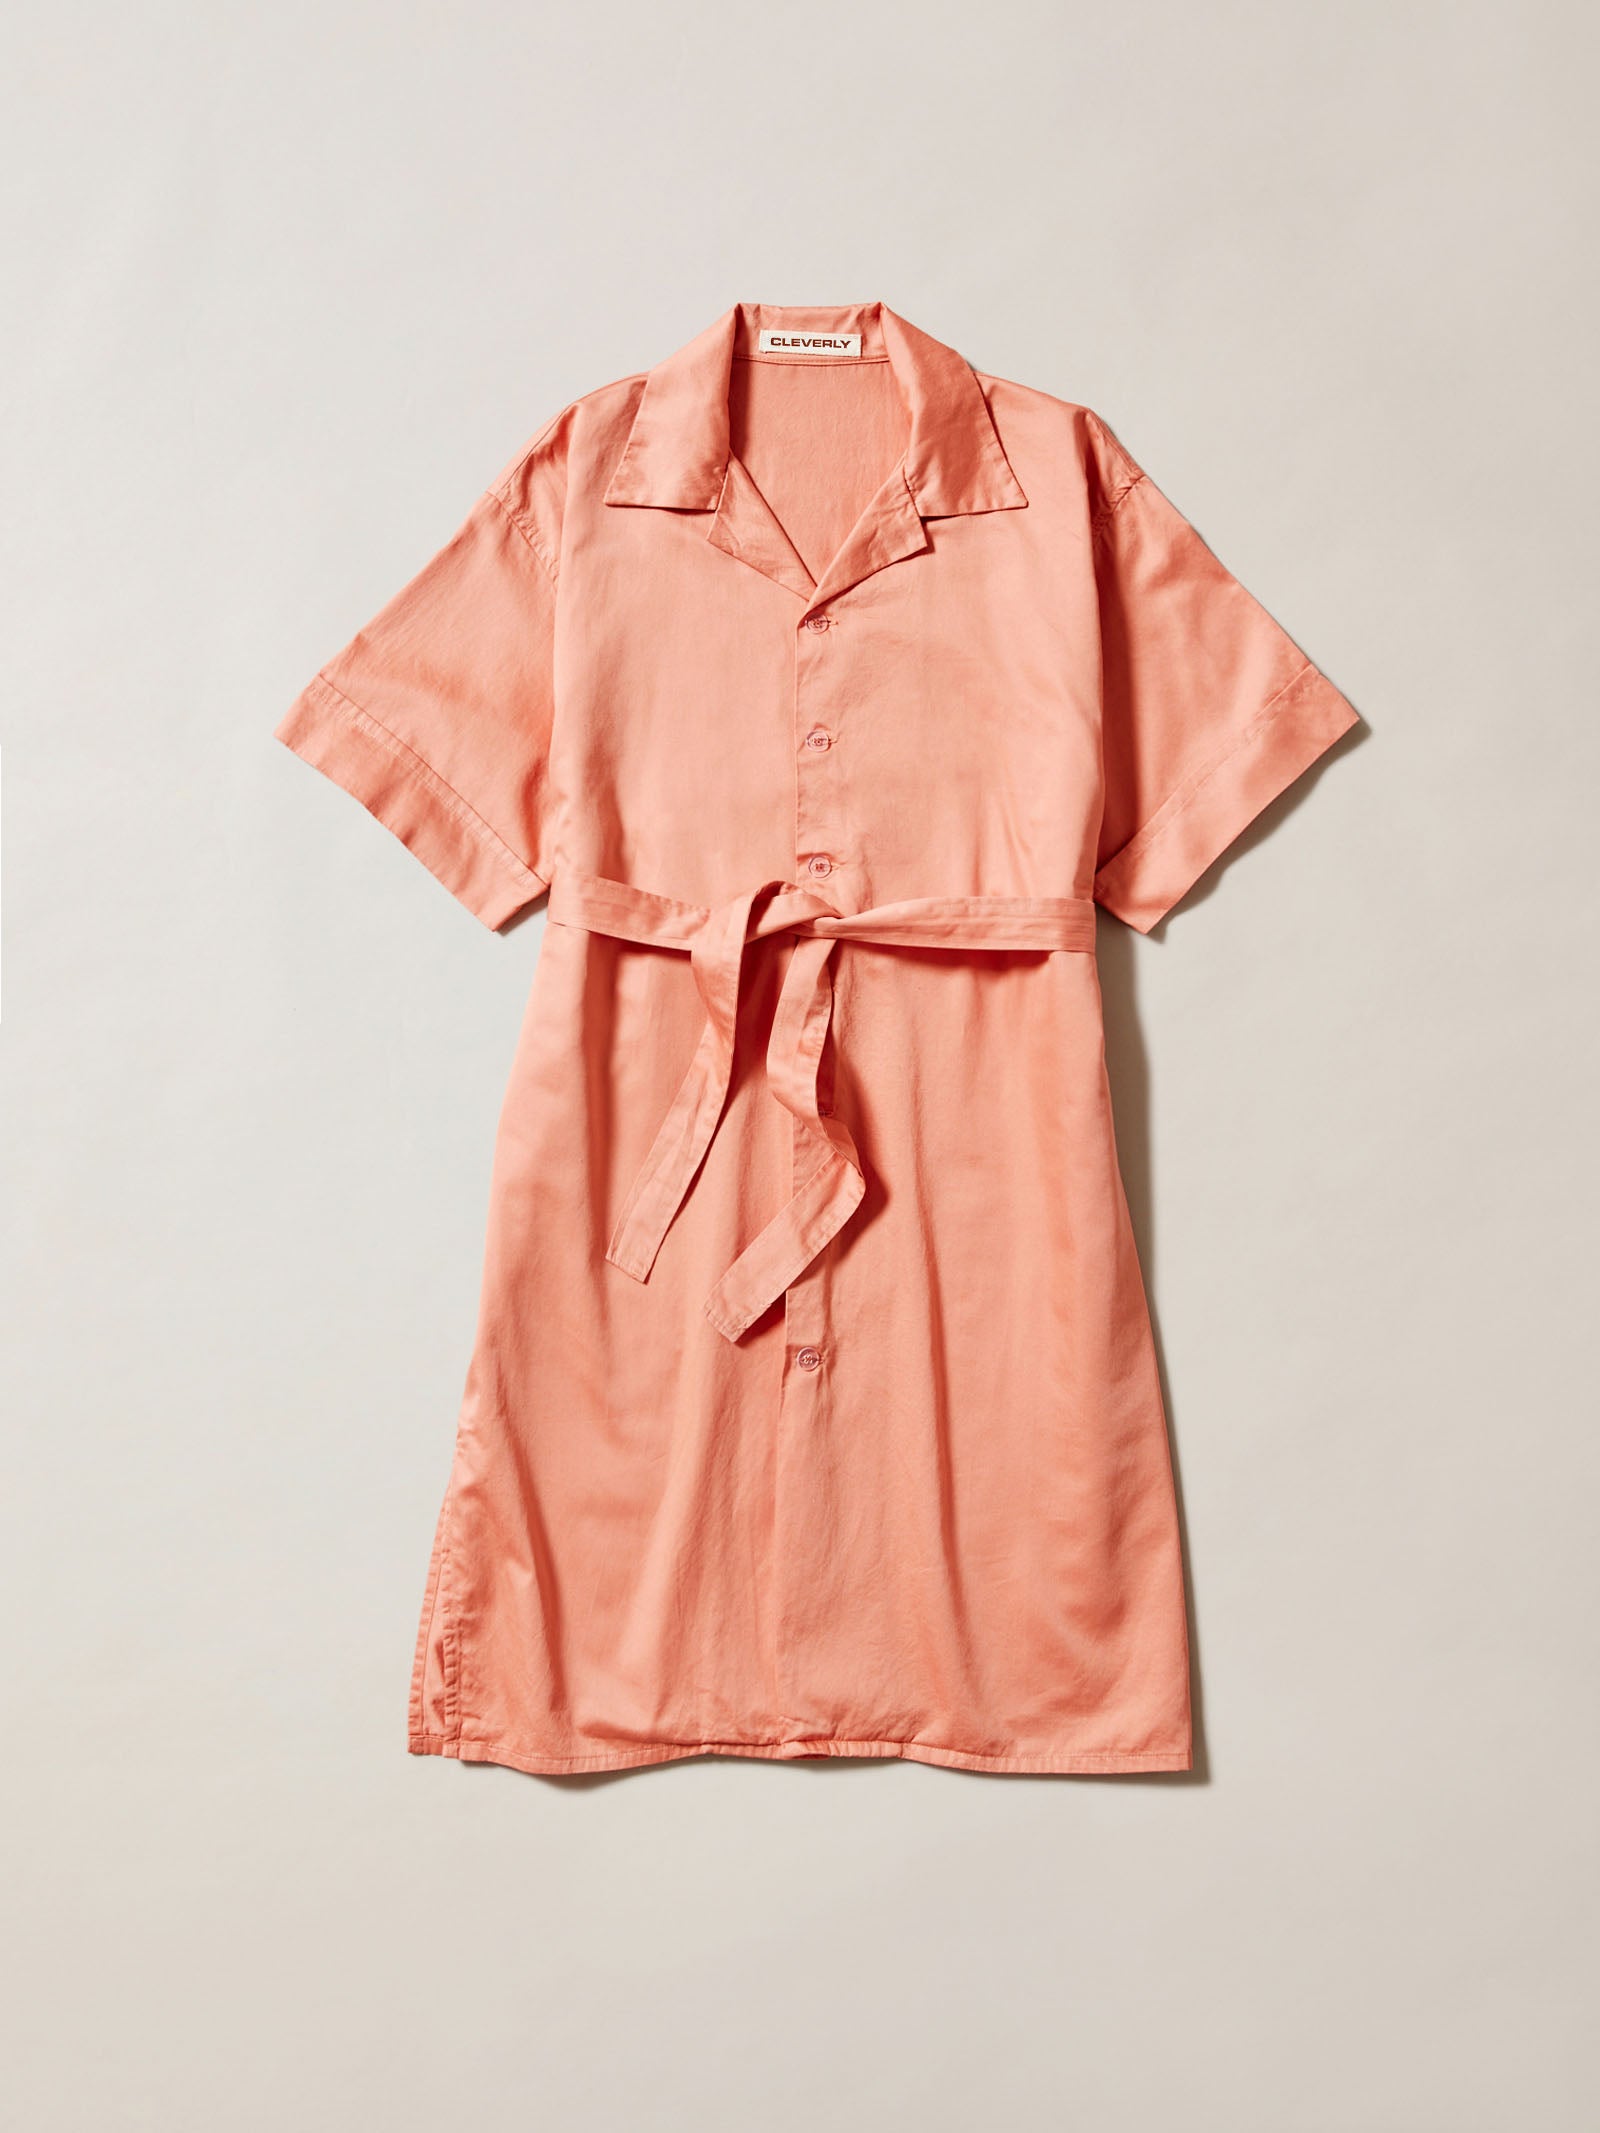 100% cotton, soft pink button down shirt dress, casual dress or luxury cotton nightwear, short sleeves and mid length